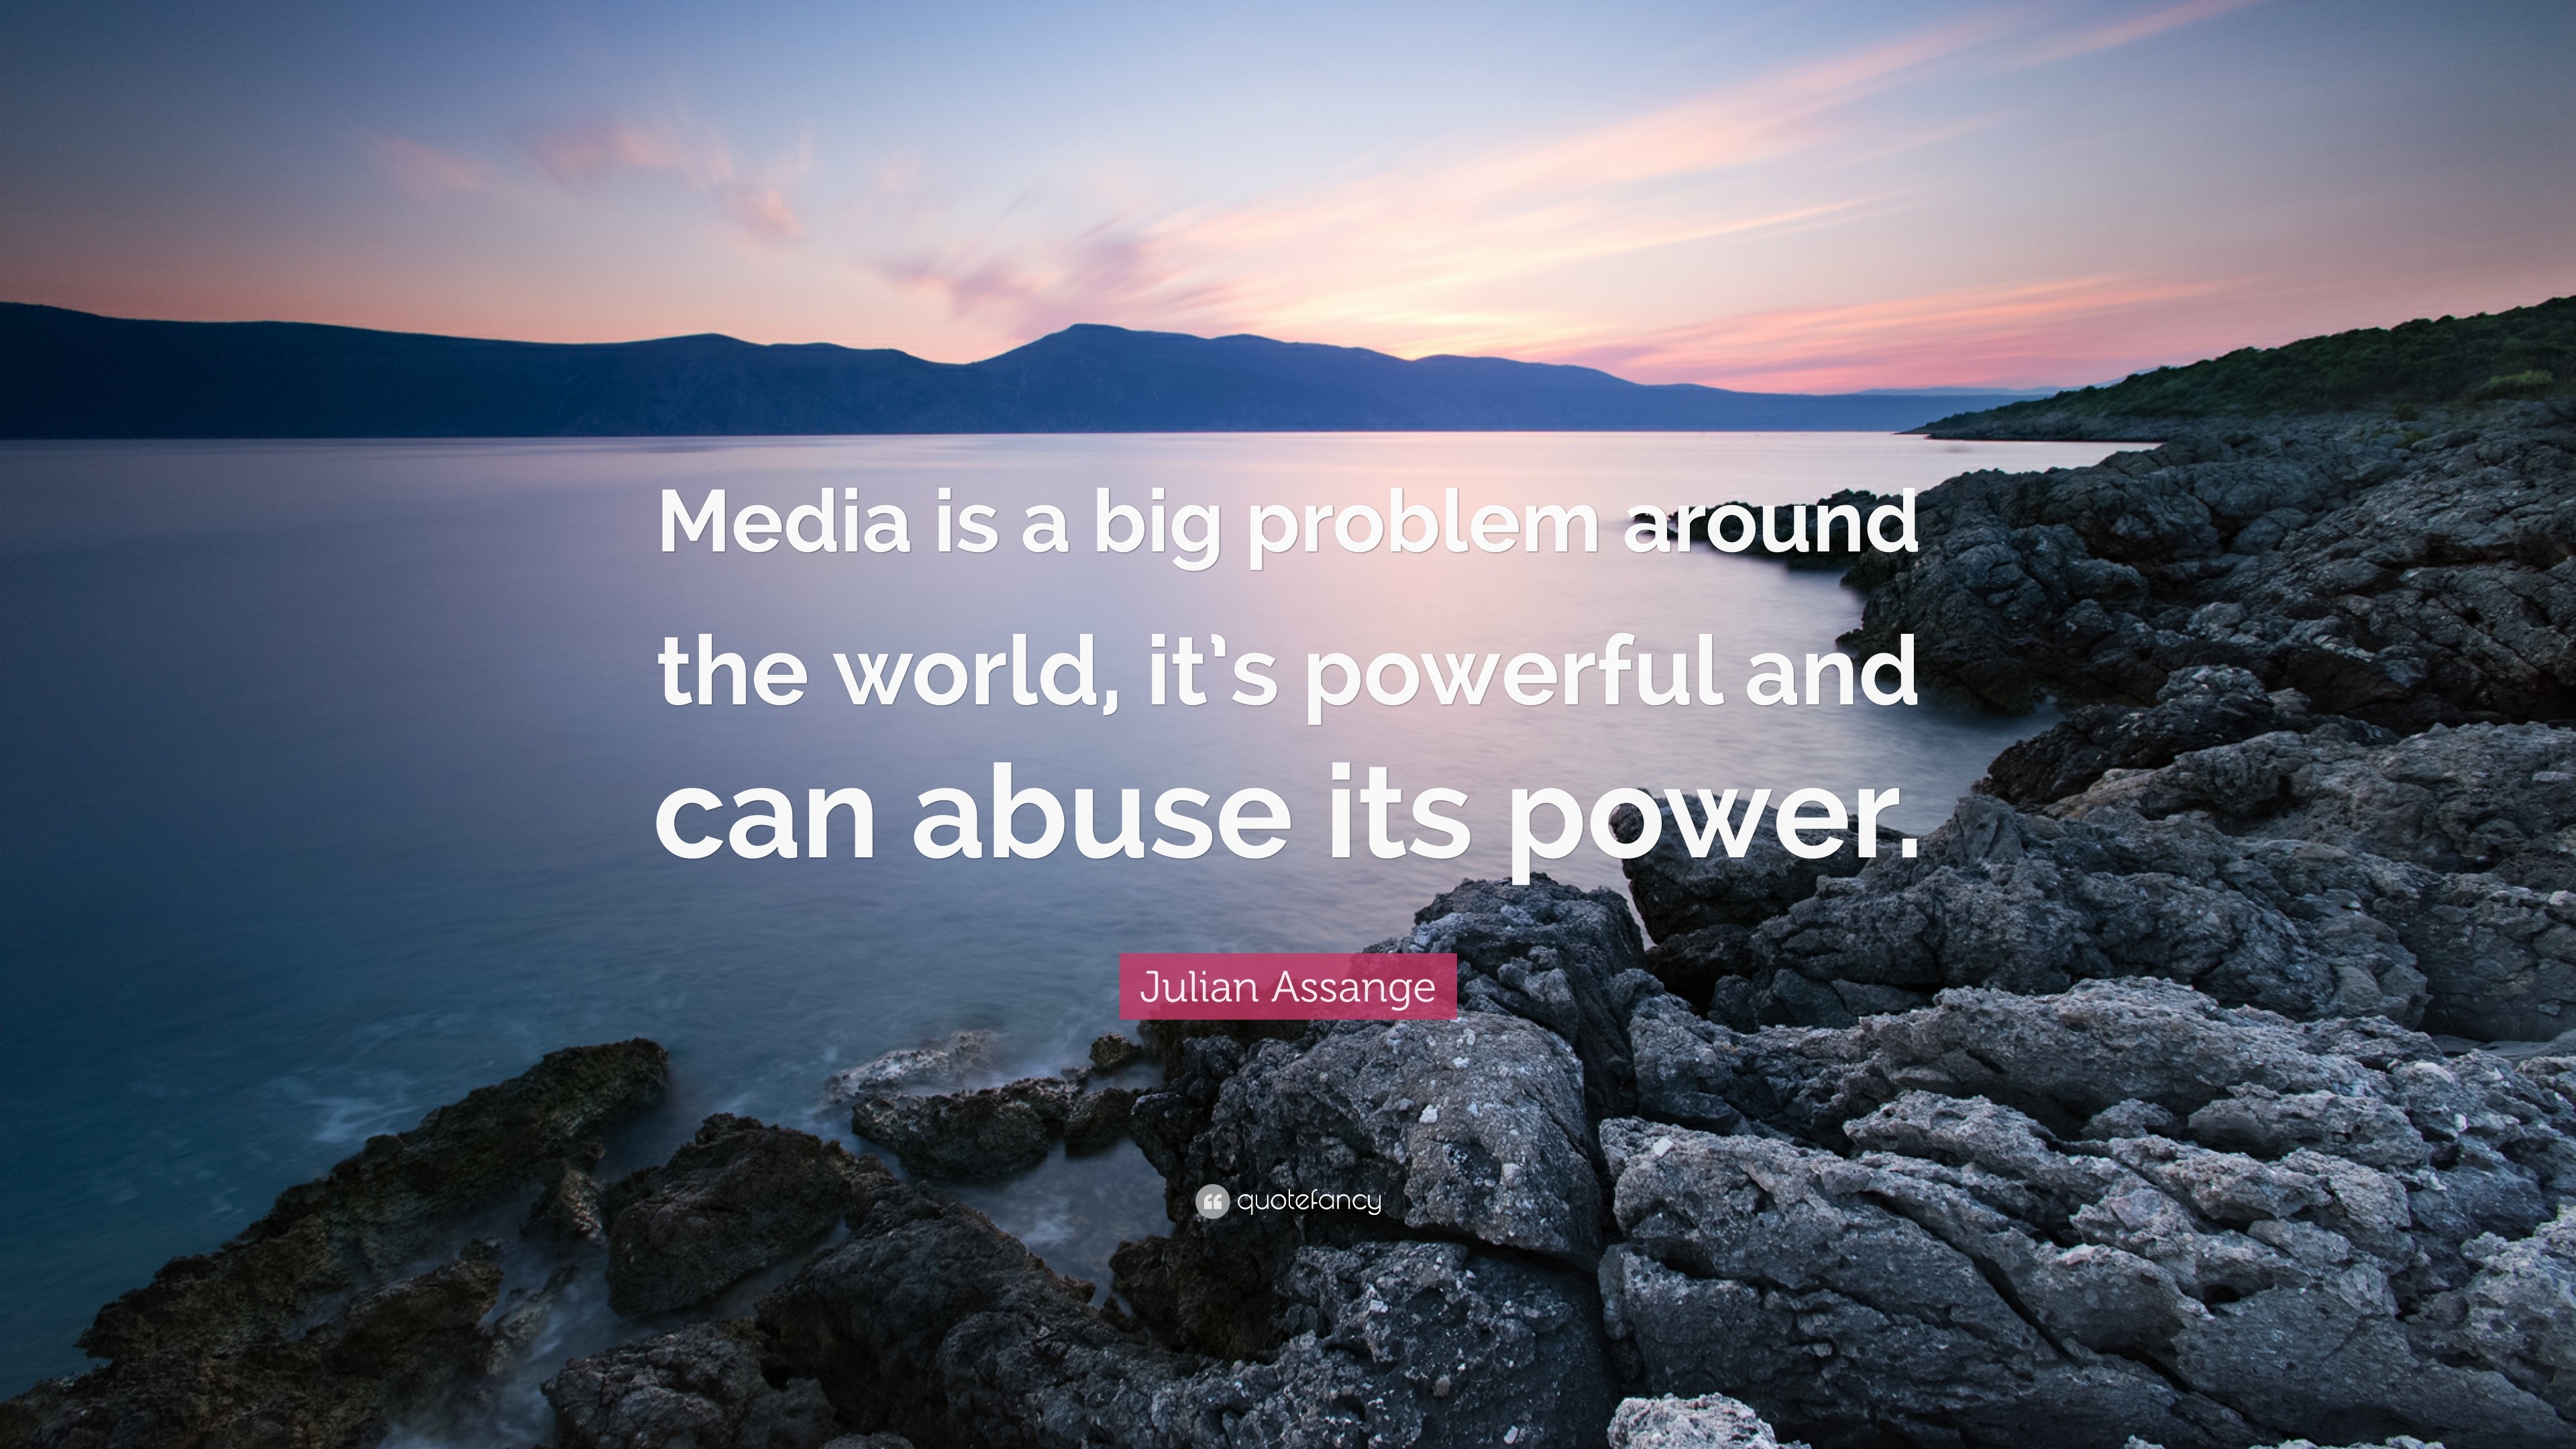 Julian Assange Quote: “Media is a big problem around the world, it’s ...